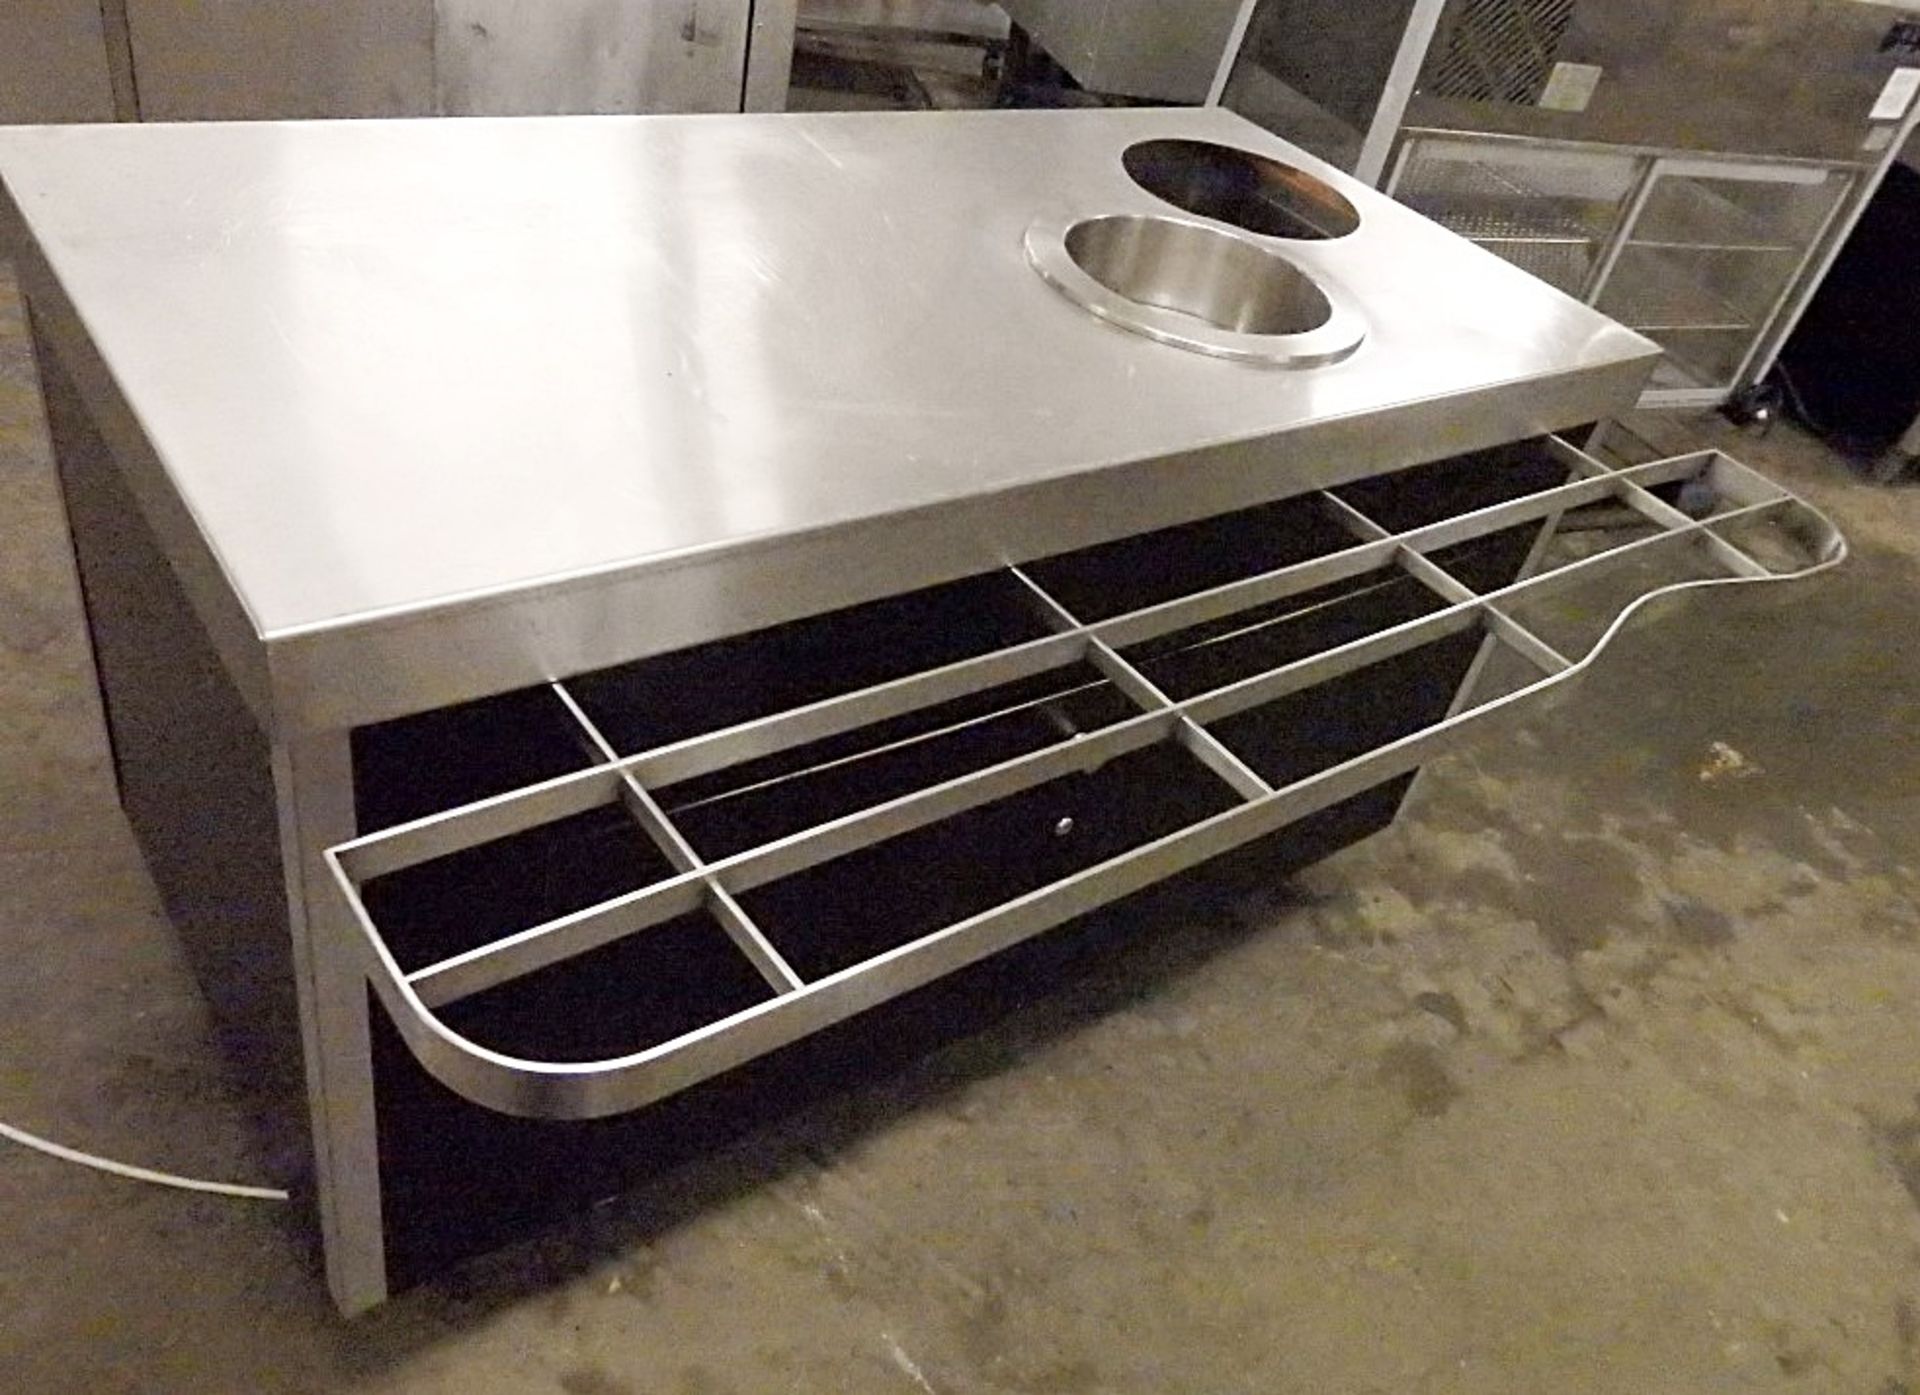 1 x Stainless Steel Hot Soup Counter - Features Tray Rail, Sockets & Fusebox - Dimensions: W150 x - Image 5 of 8